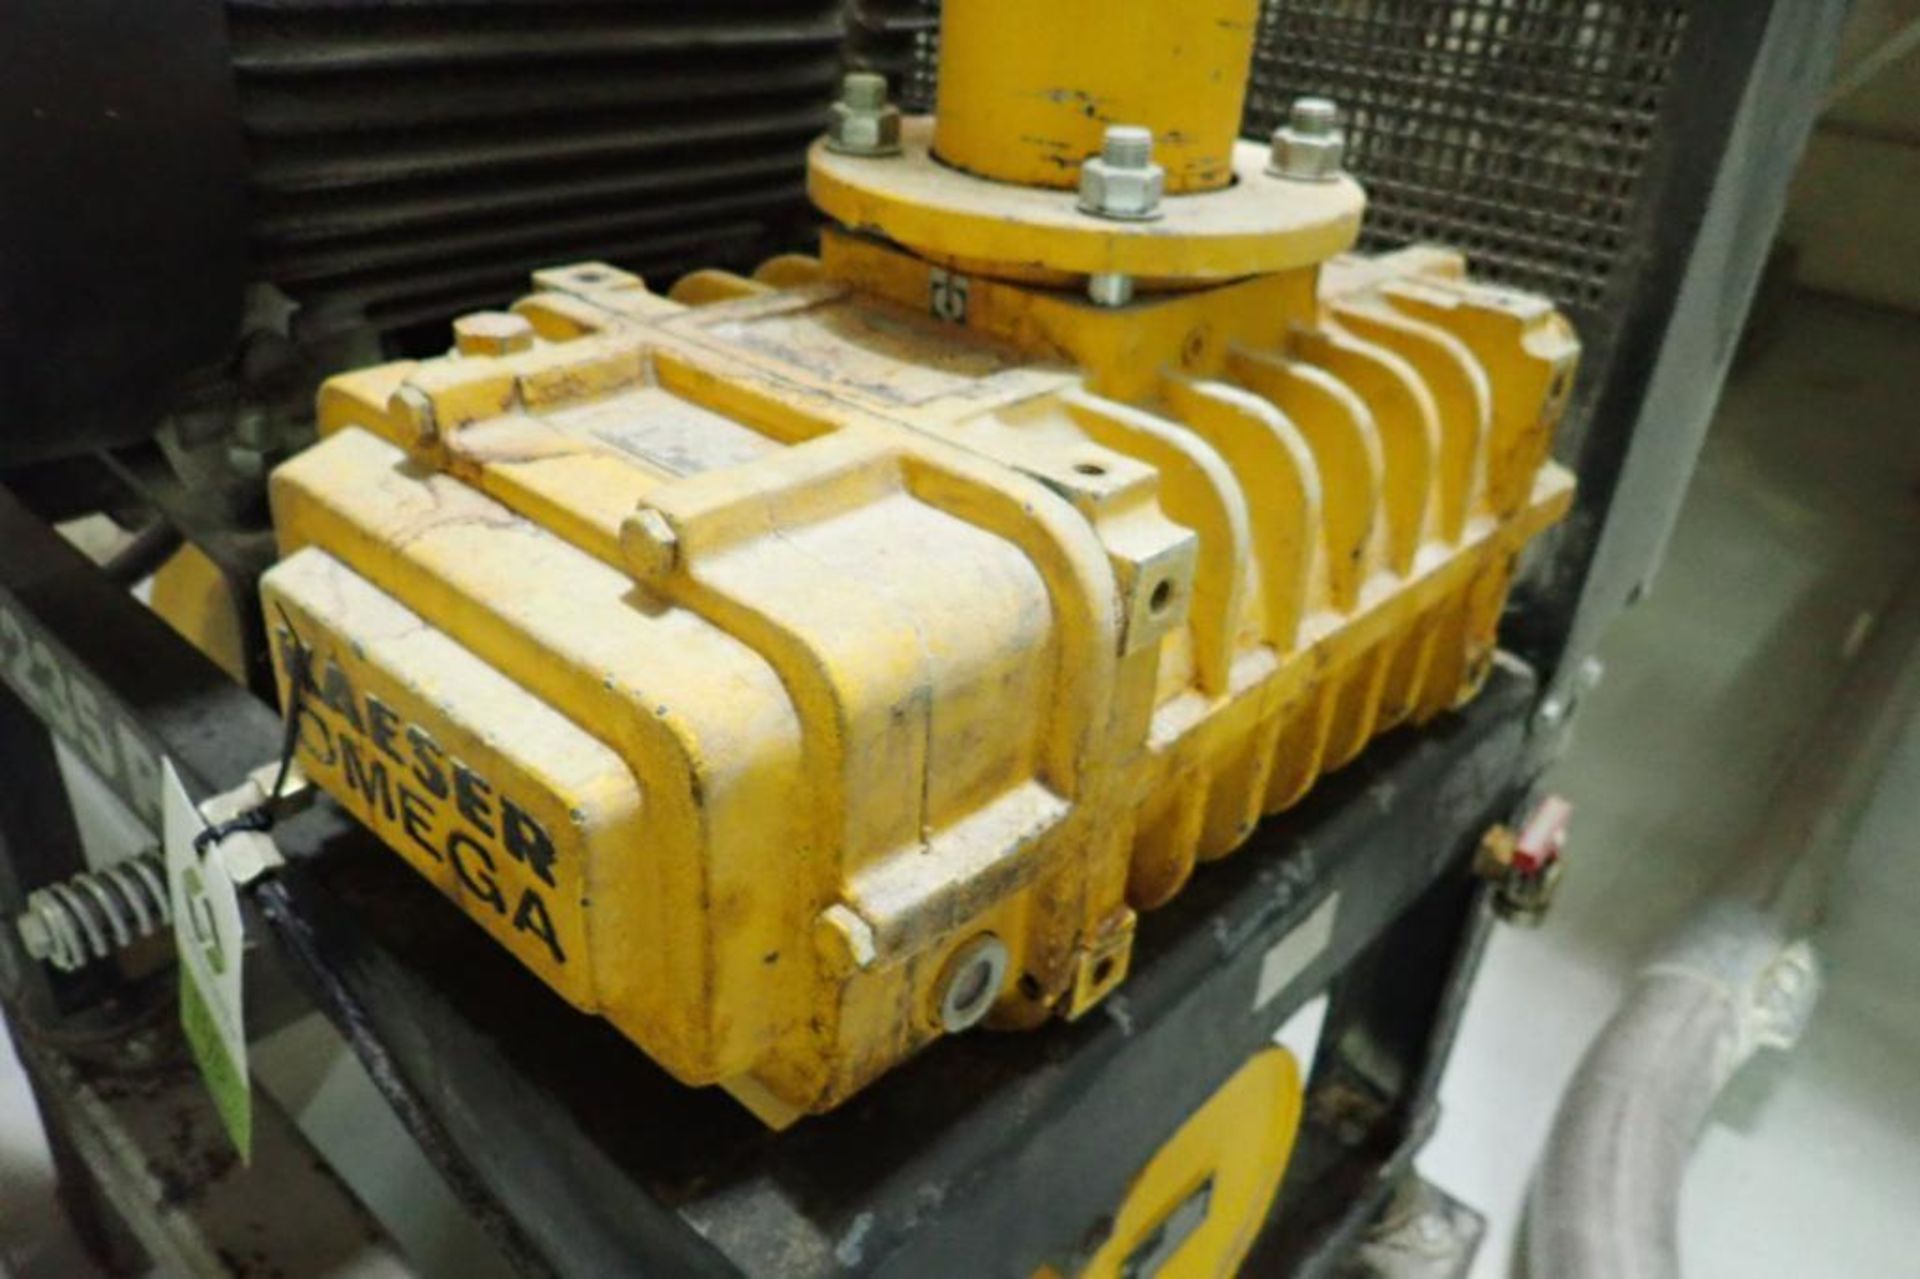 2005 Kaeser Omega 43 plus rotary blower, SN 1656 BJ 2005. **Rigging Fee: $200** (Located in Brooklyn - Image 3 of 7